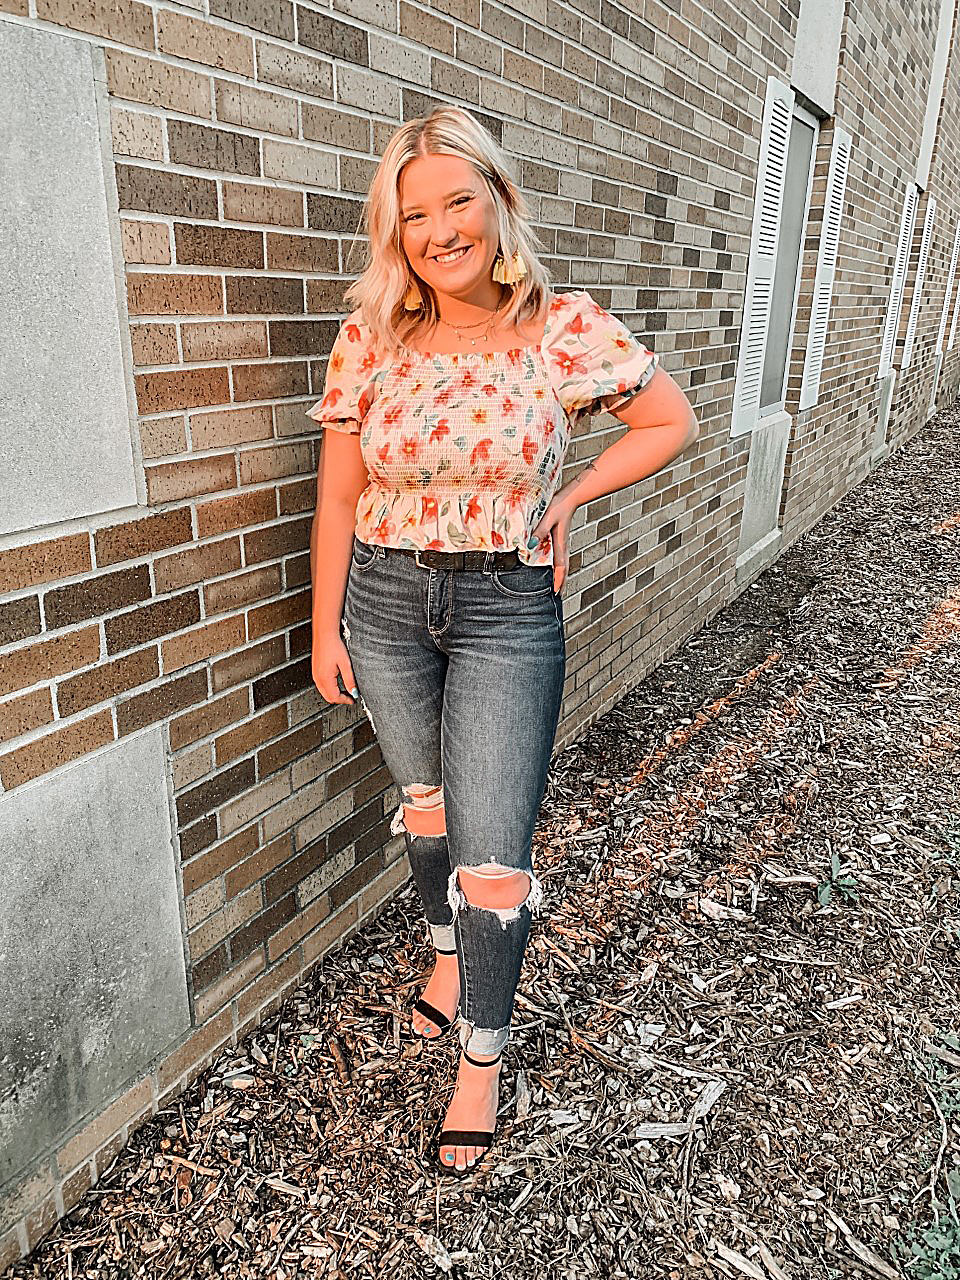 Meet the Panhellenic Council president – The Daily Eastern News